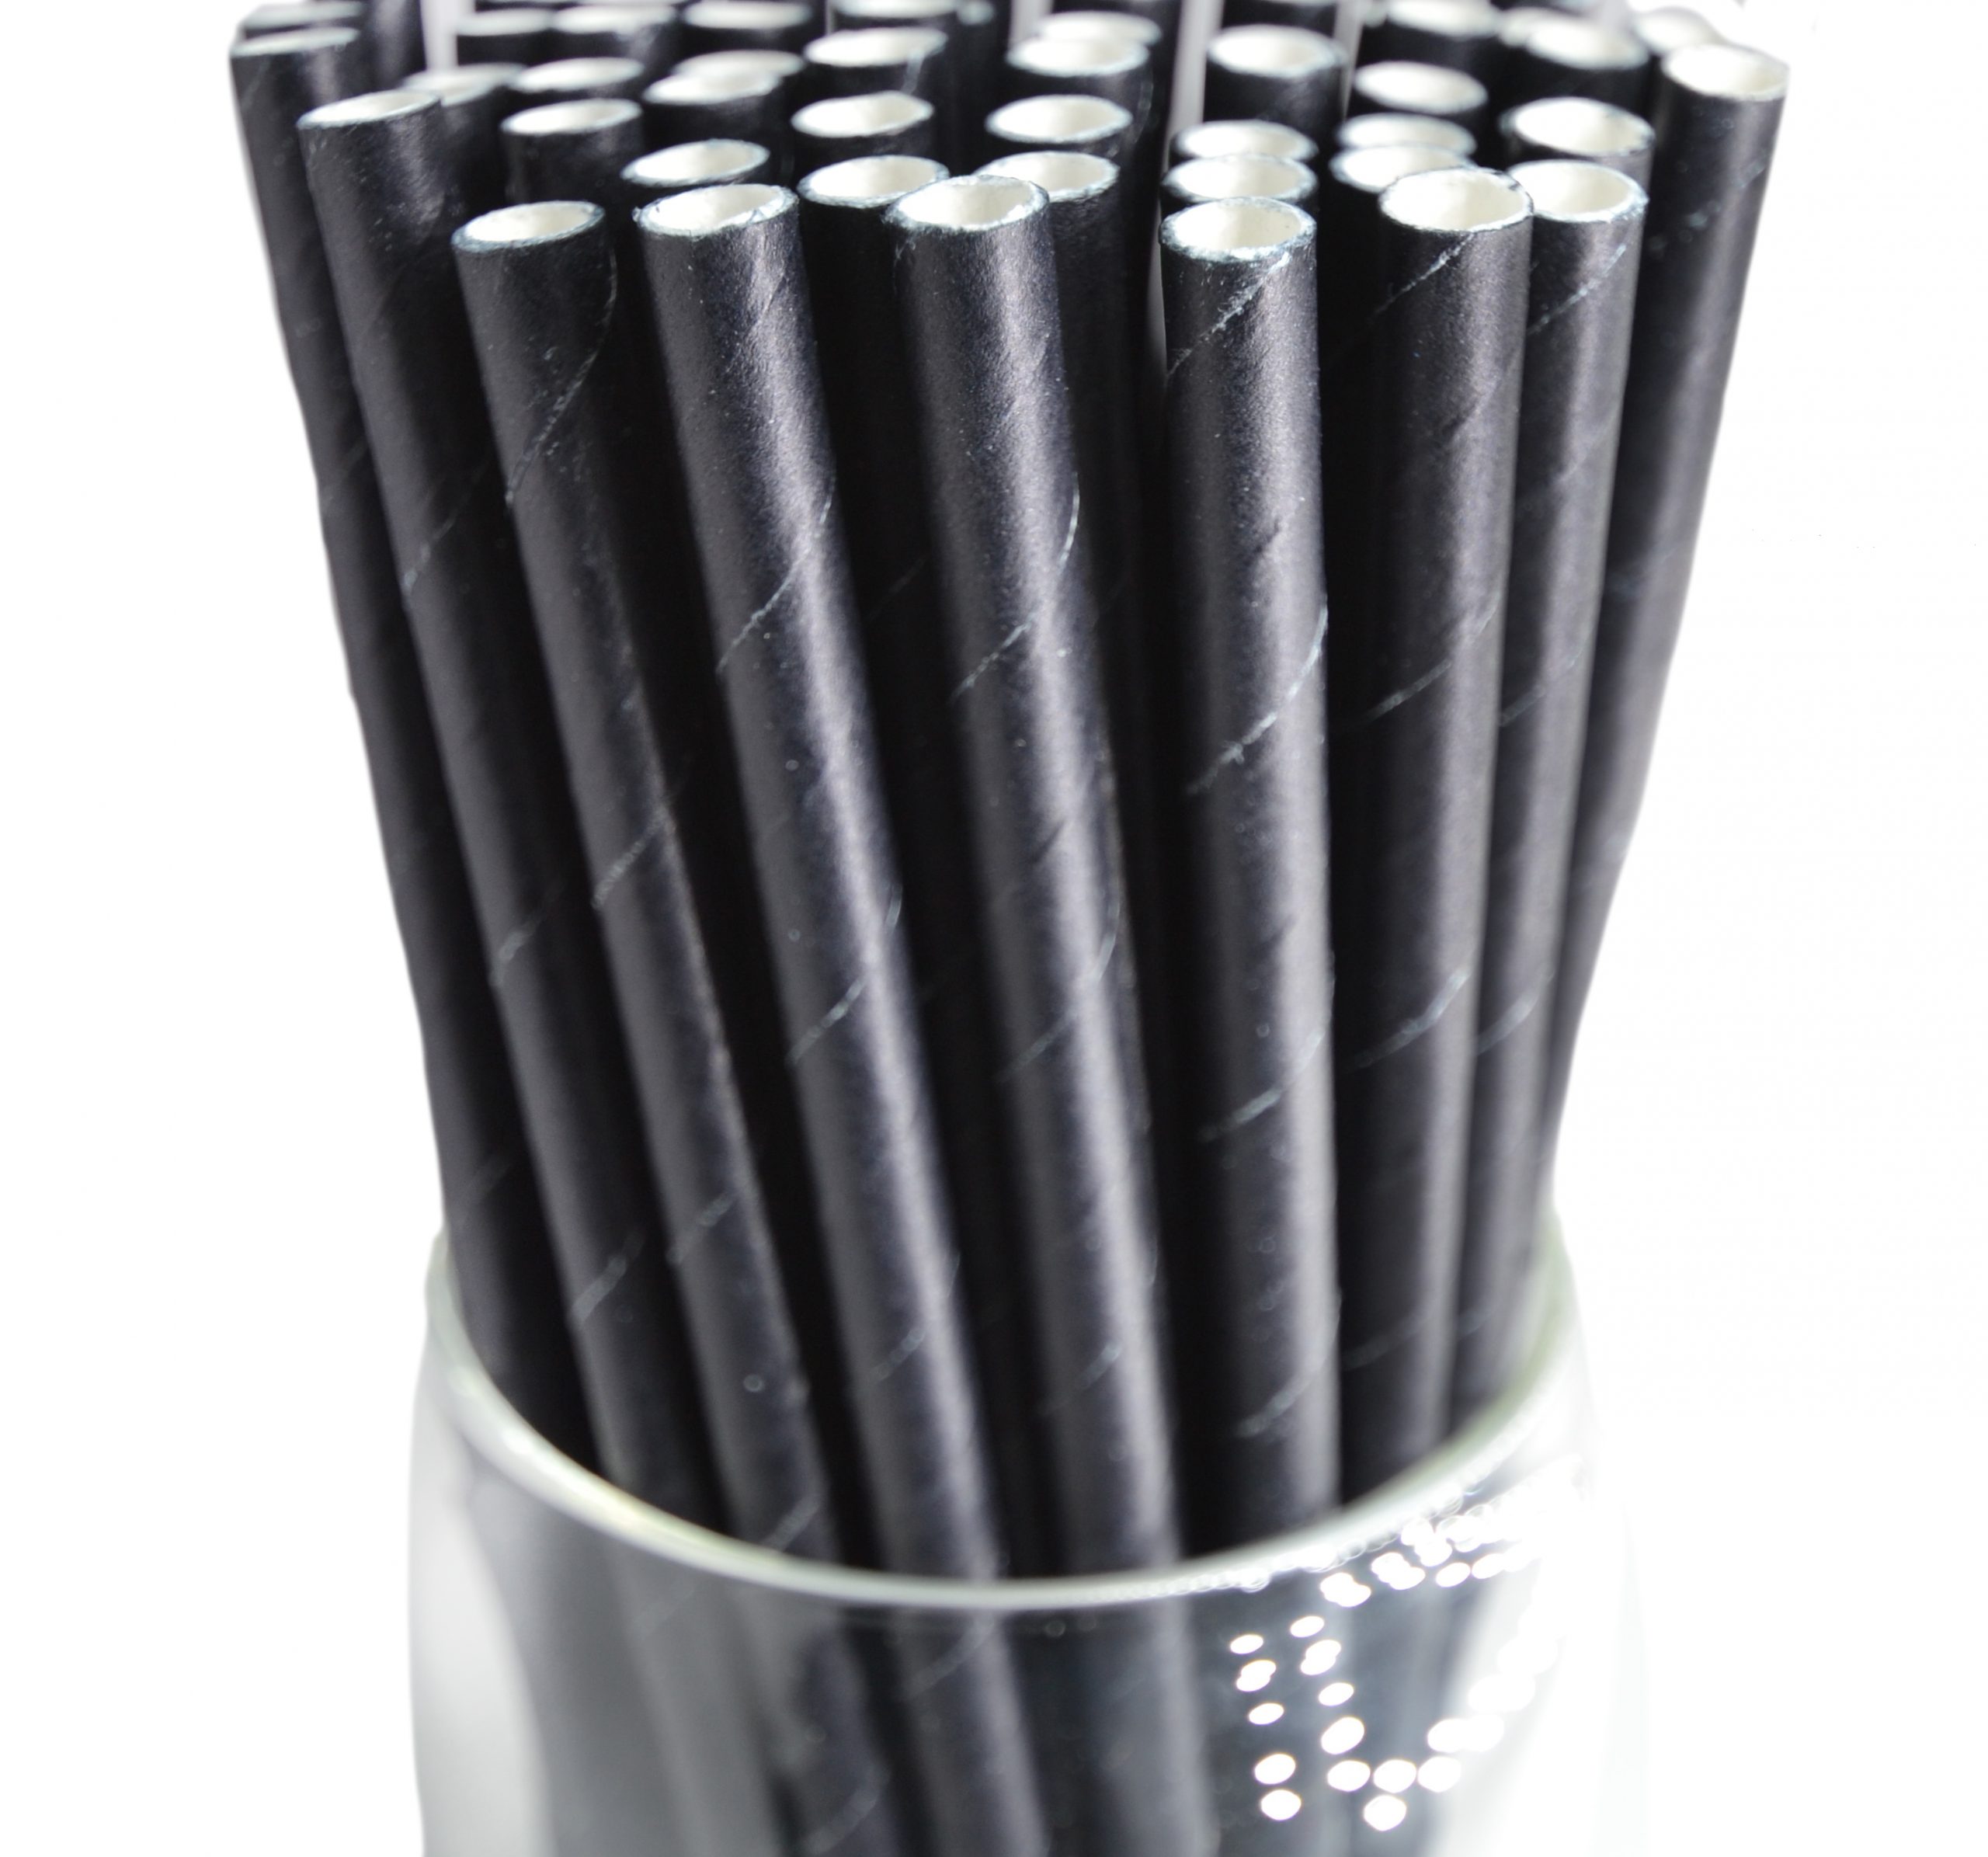 https://rocpaperstraws.com/wp-content/uploads/2022/02/Solid-black-in-glass-scaled.jpg